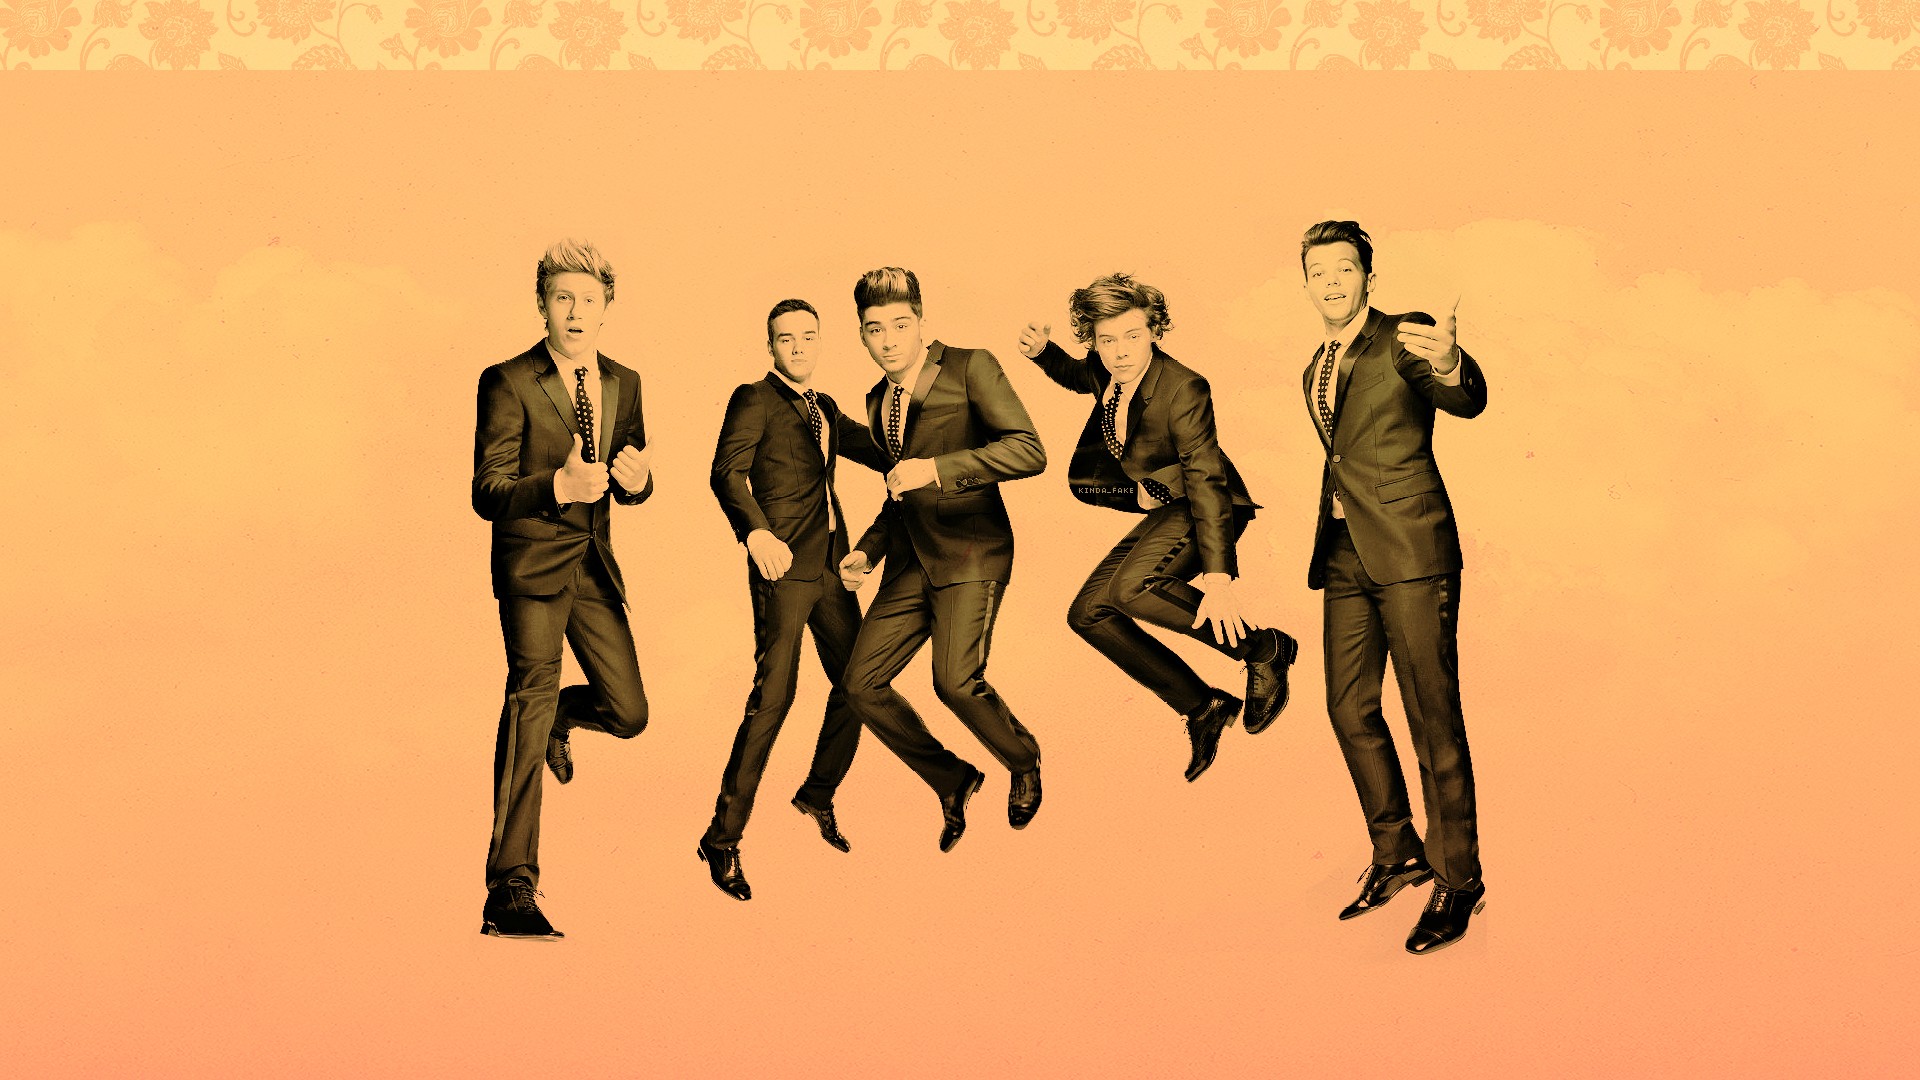 One Direction Background 2013 wallpapers55com   Best Wallpapers for